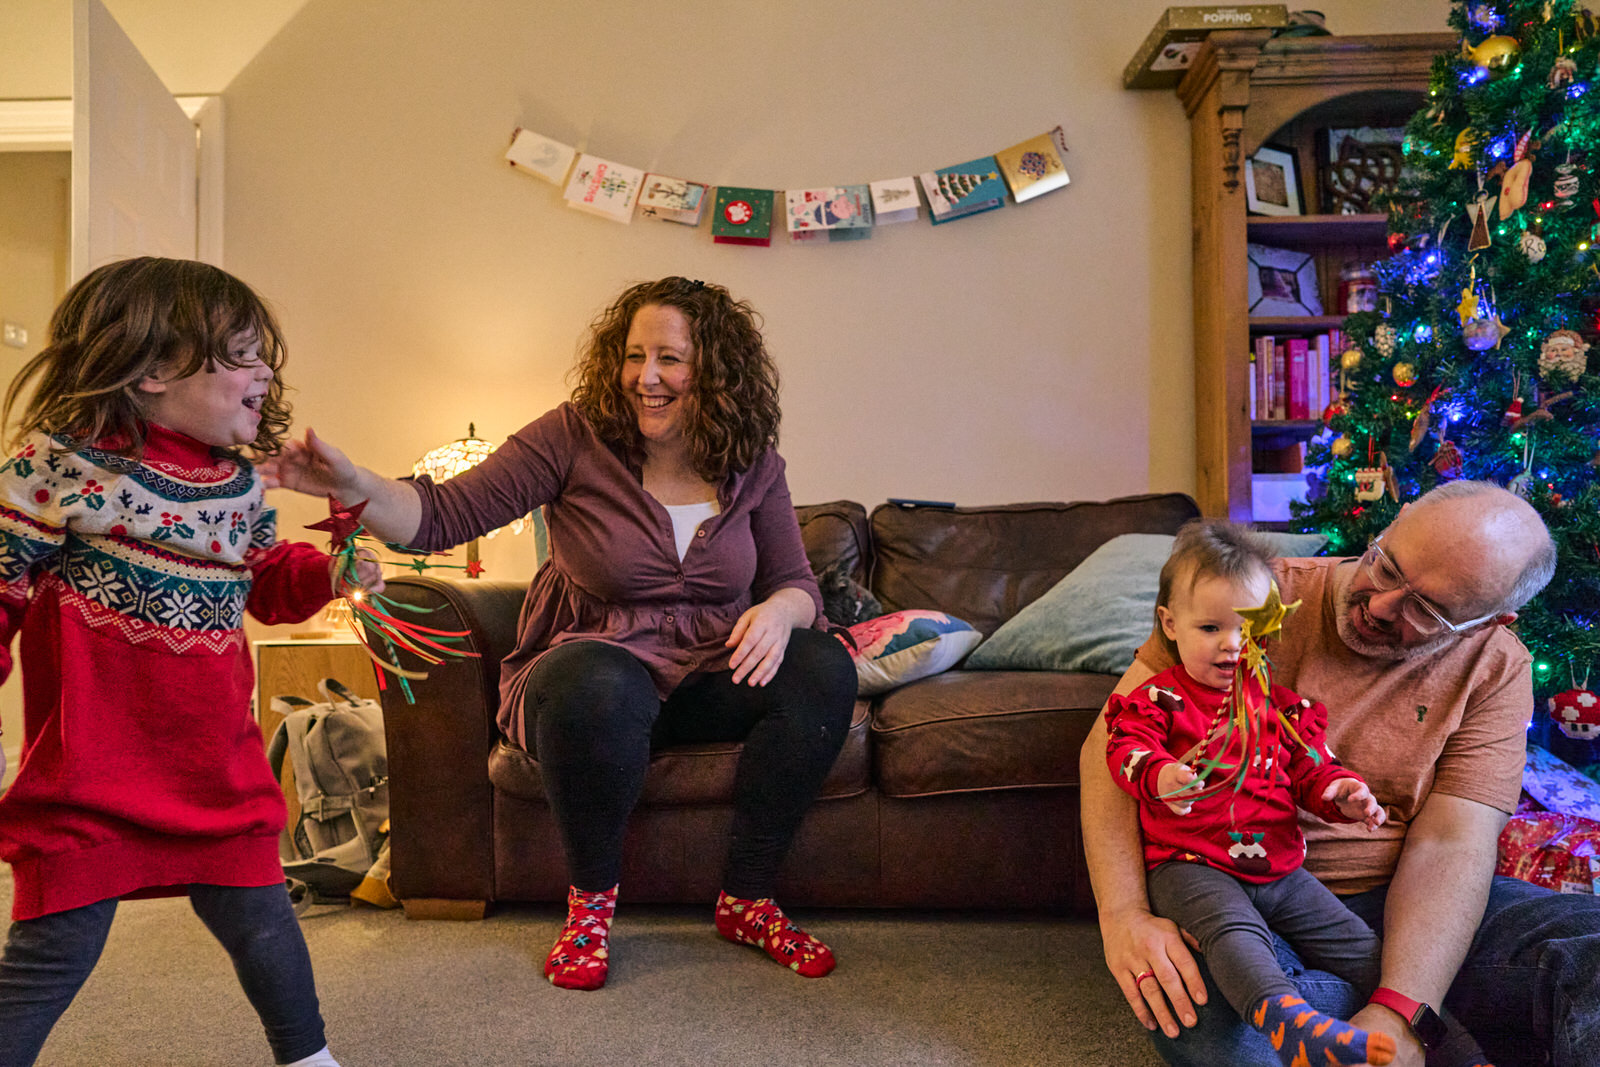 a natural family photo from their living room at Christmas in Ramsbottom